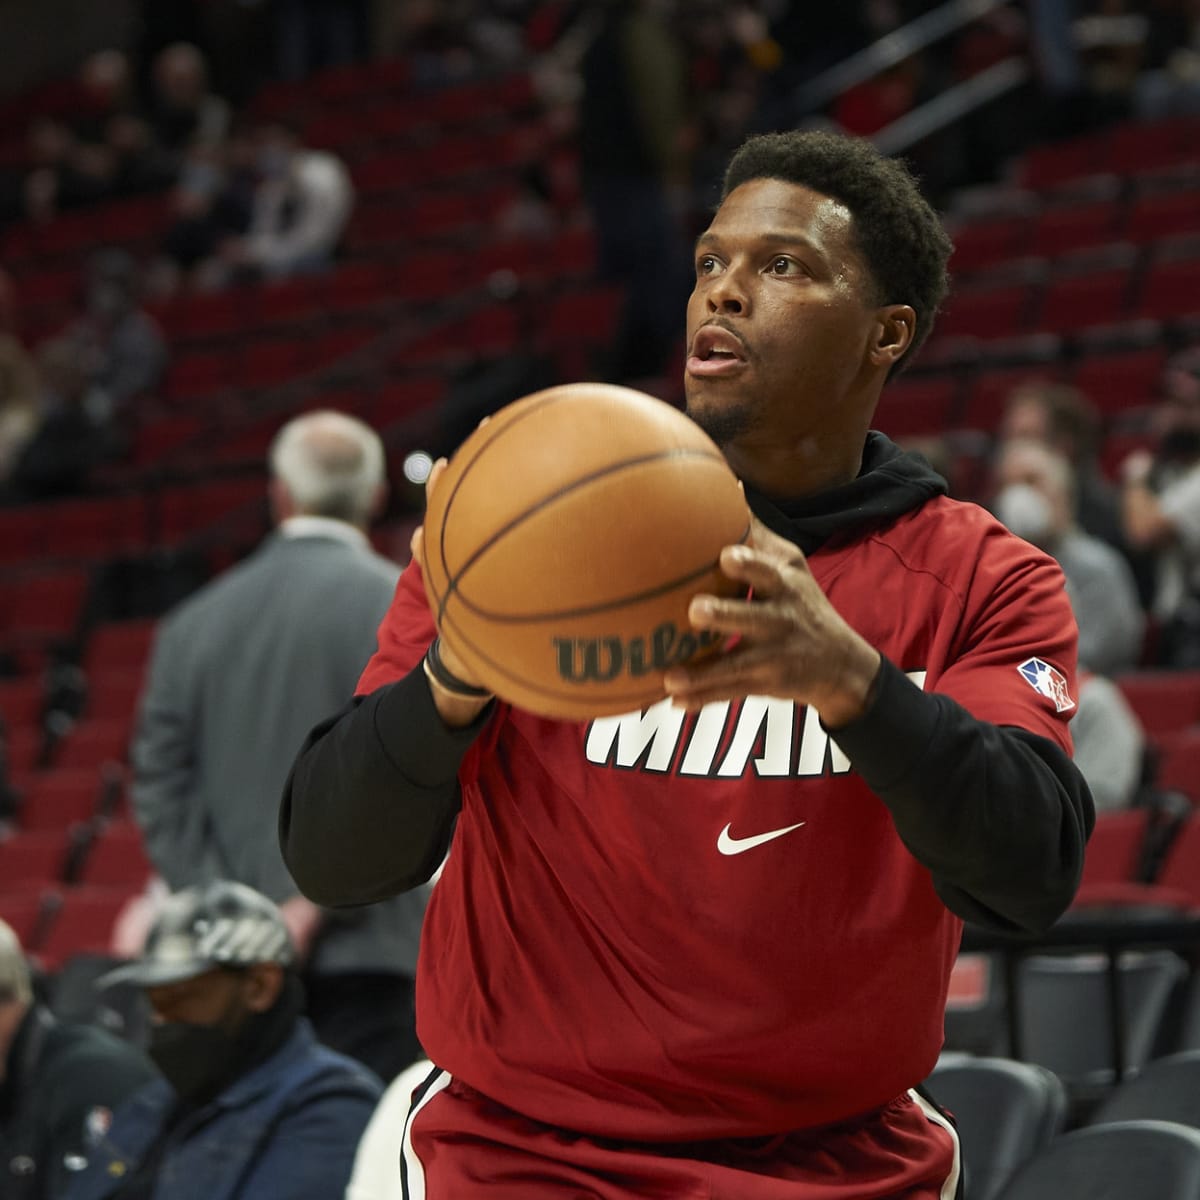 Kyle Lowry quickly fitting in well and helping Miami Heat